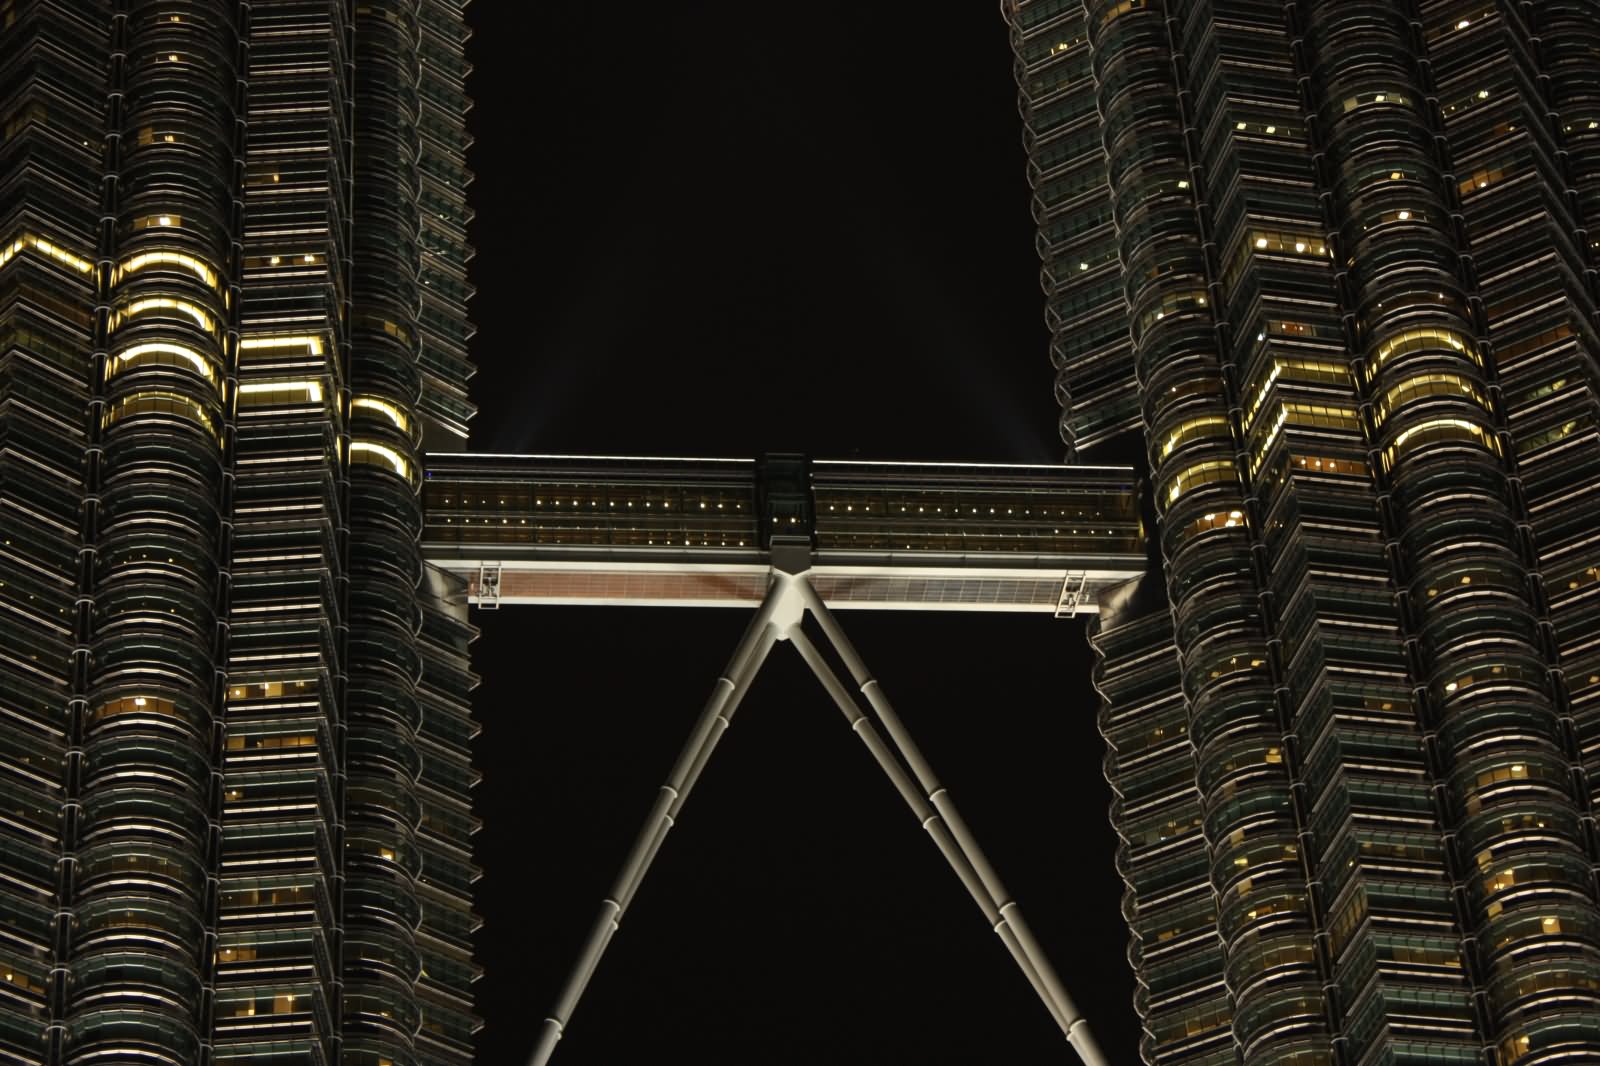 15 Petronas Tower Sky Bridge Pictures And Images